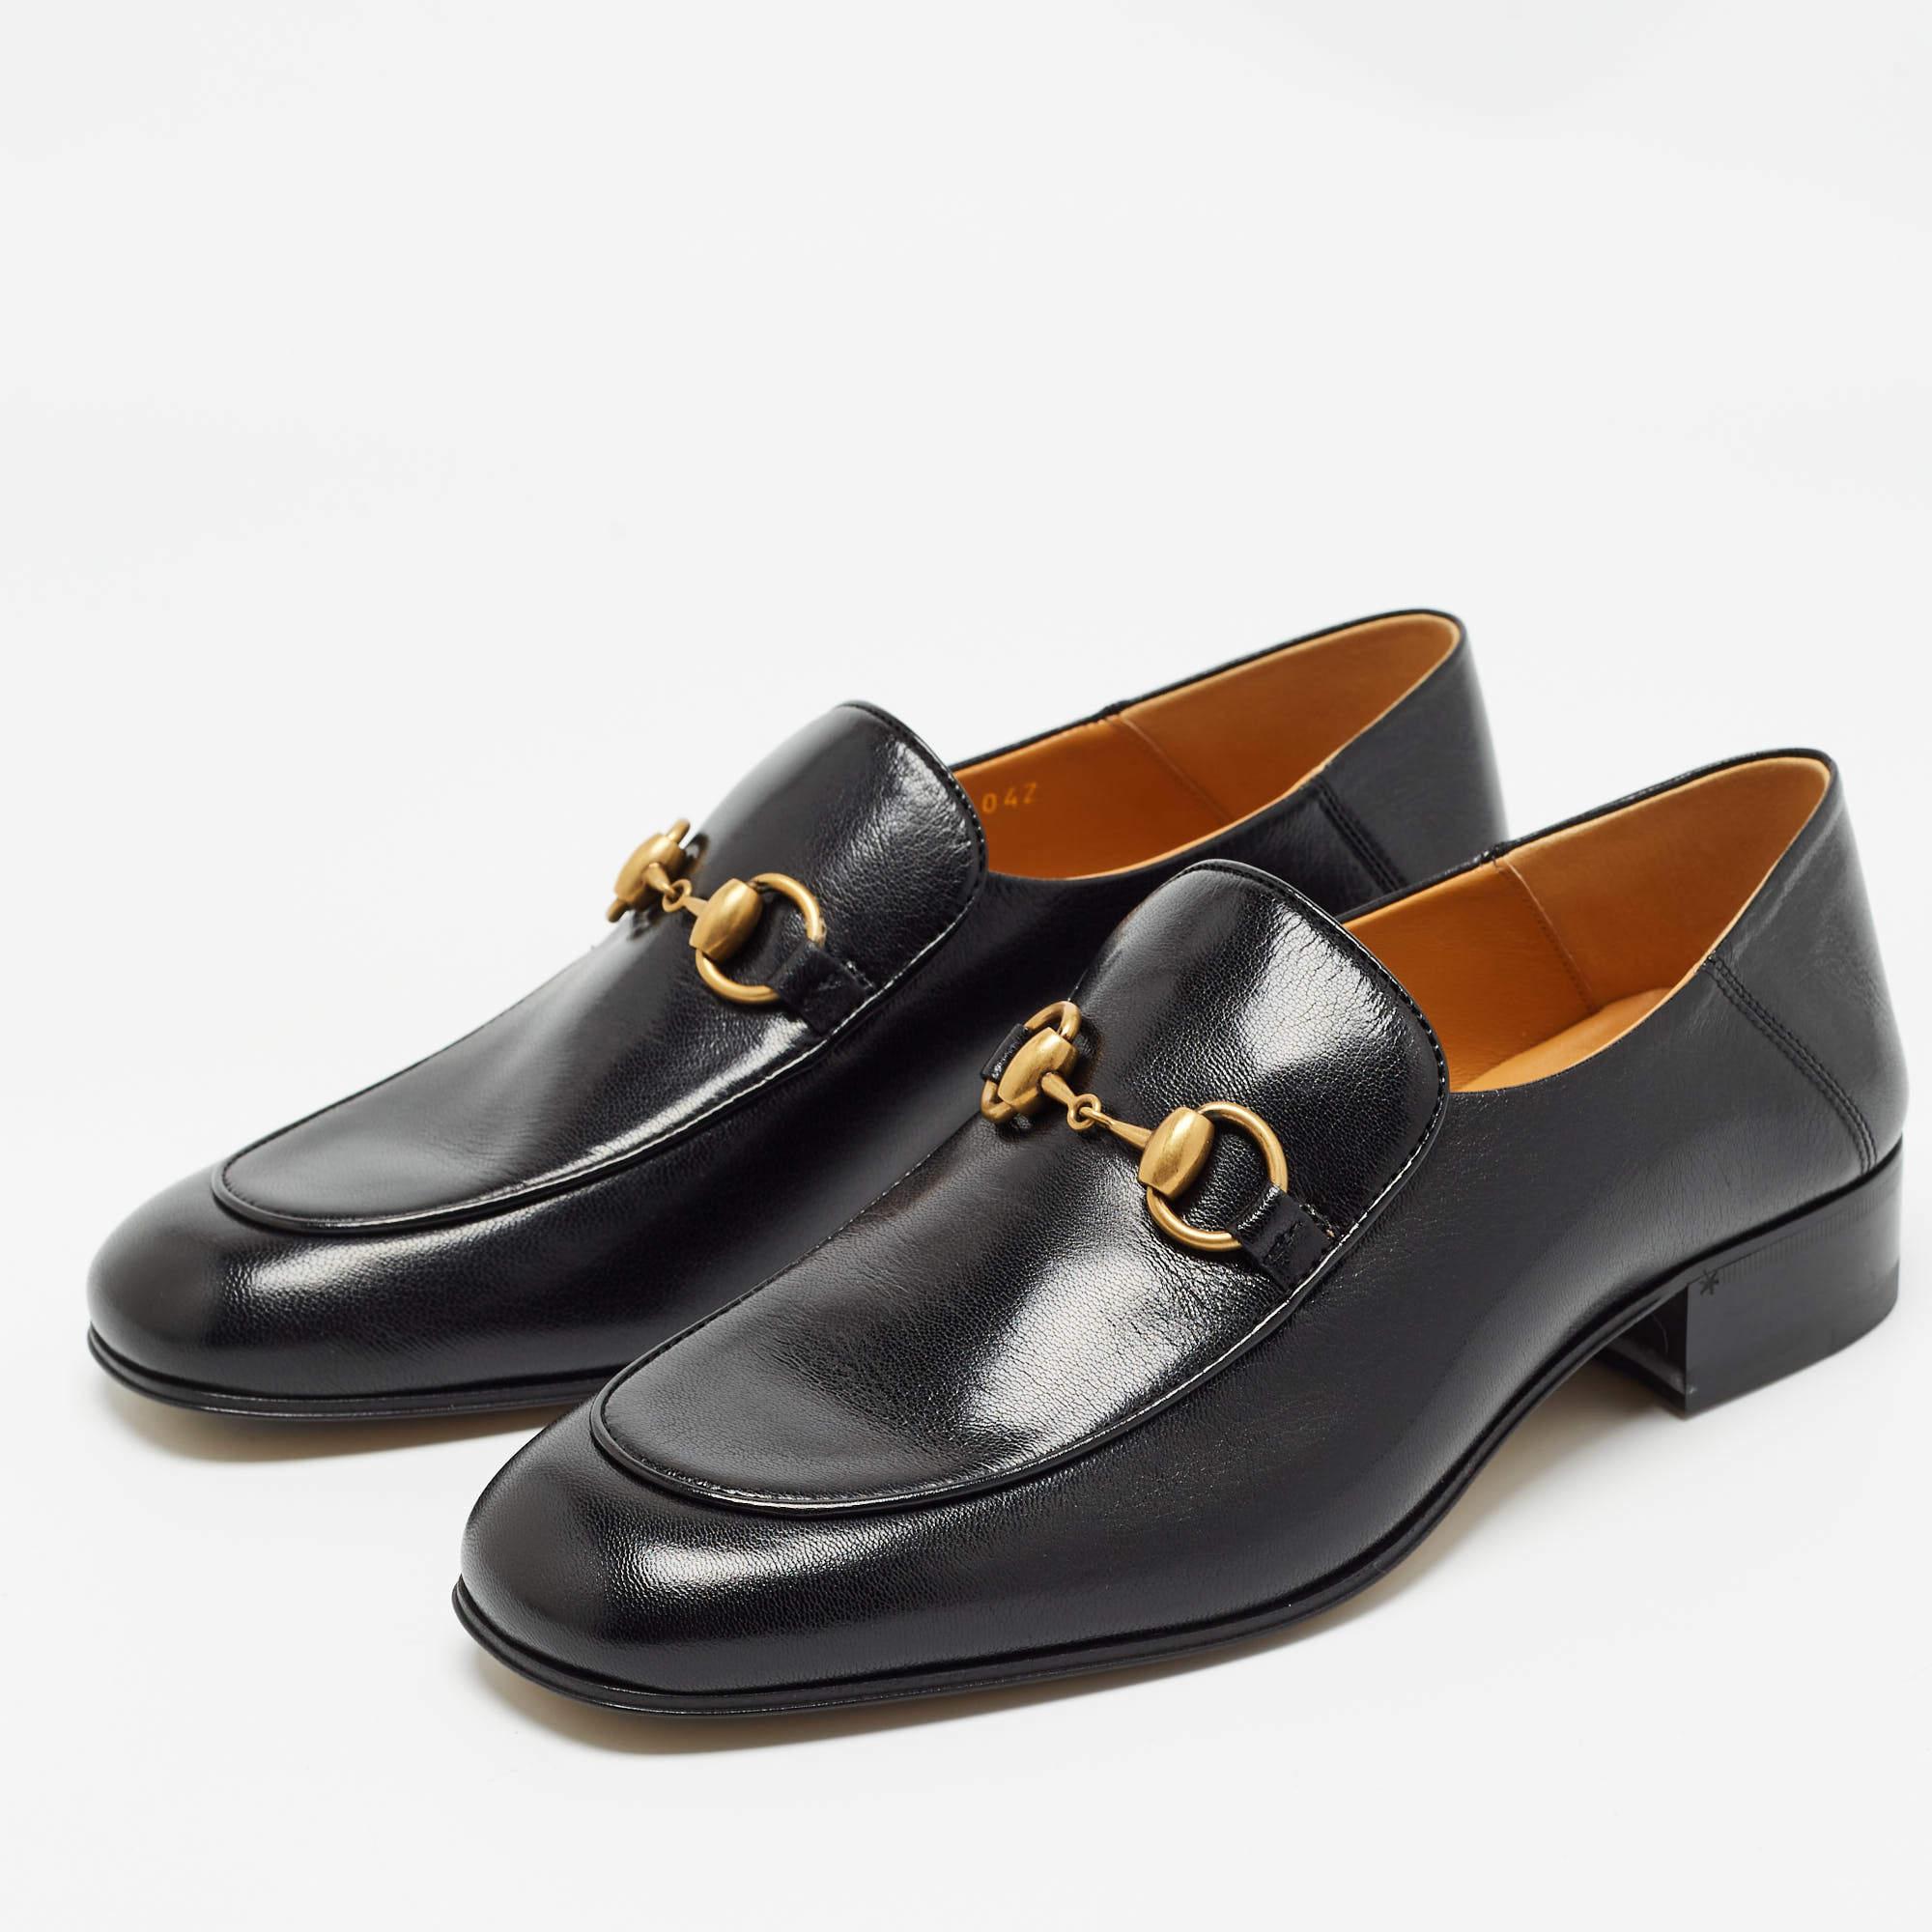 Gucci Black Leather Horsebit Foldable Loafers Size 39 2